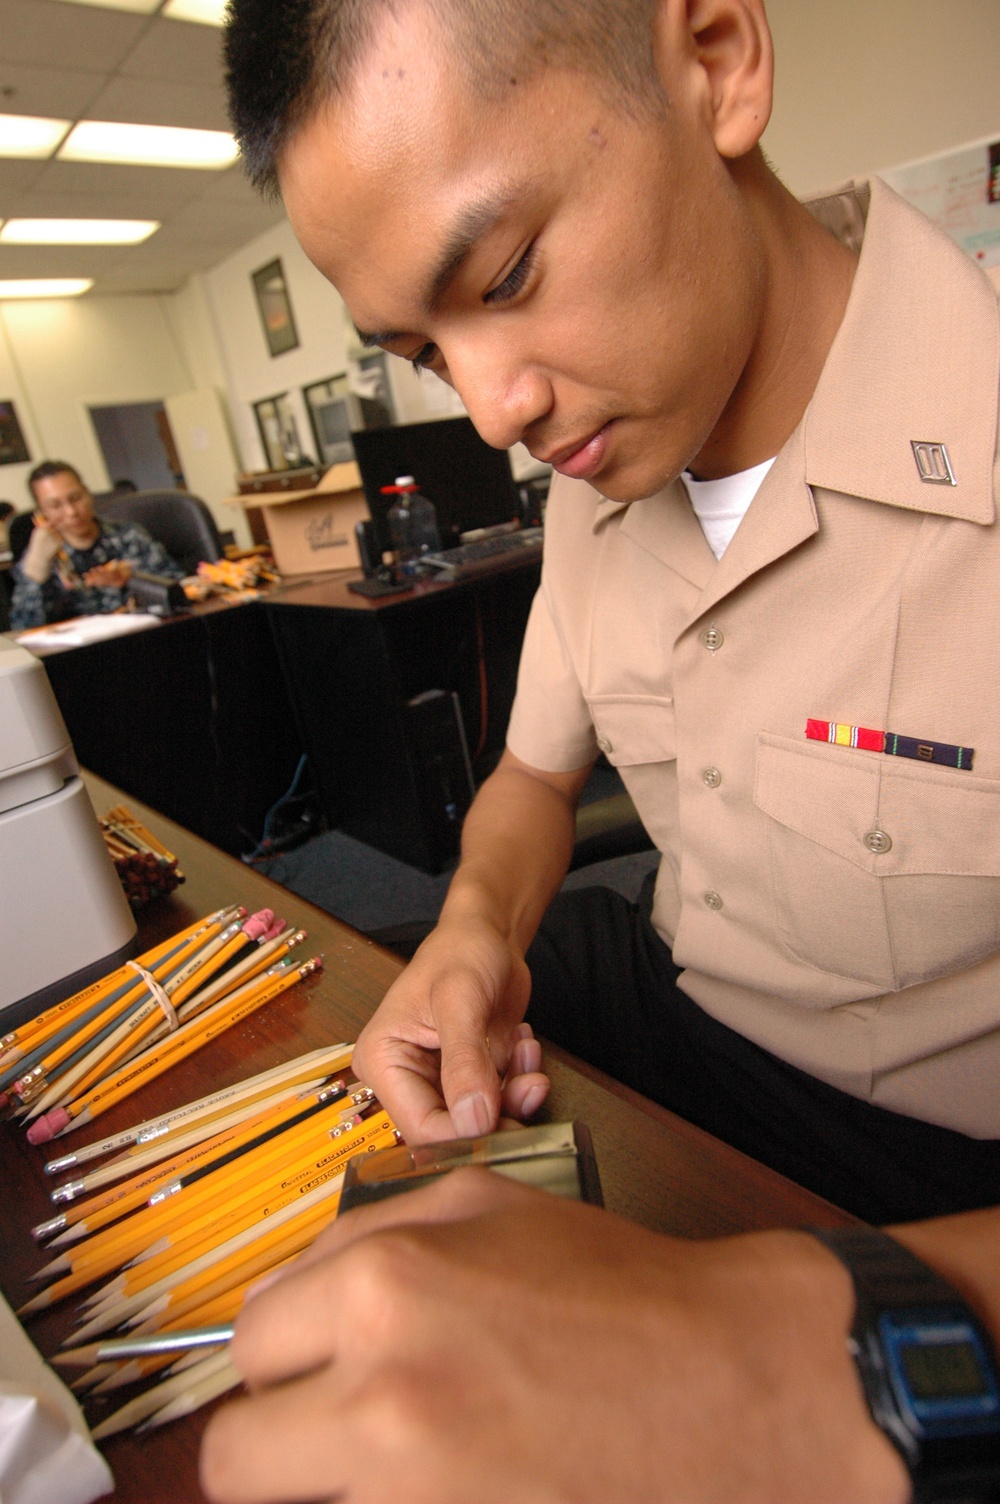 Preparations for Navy Advancement Exams